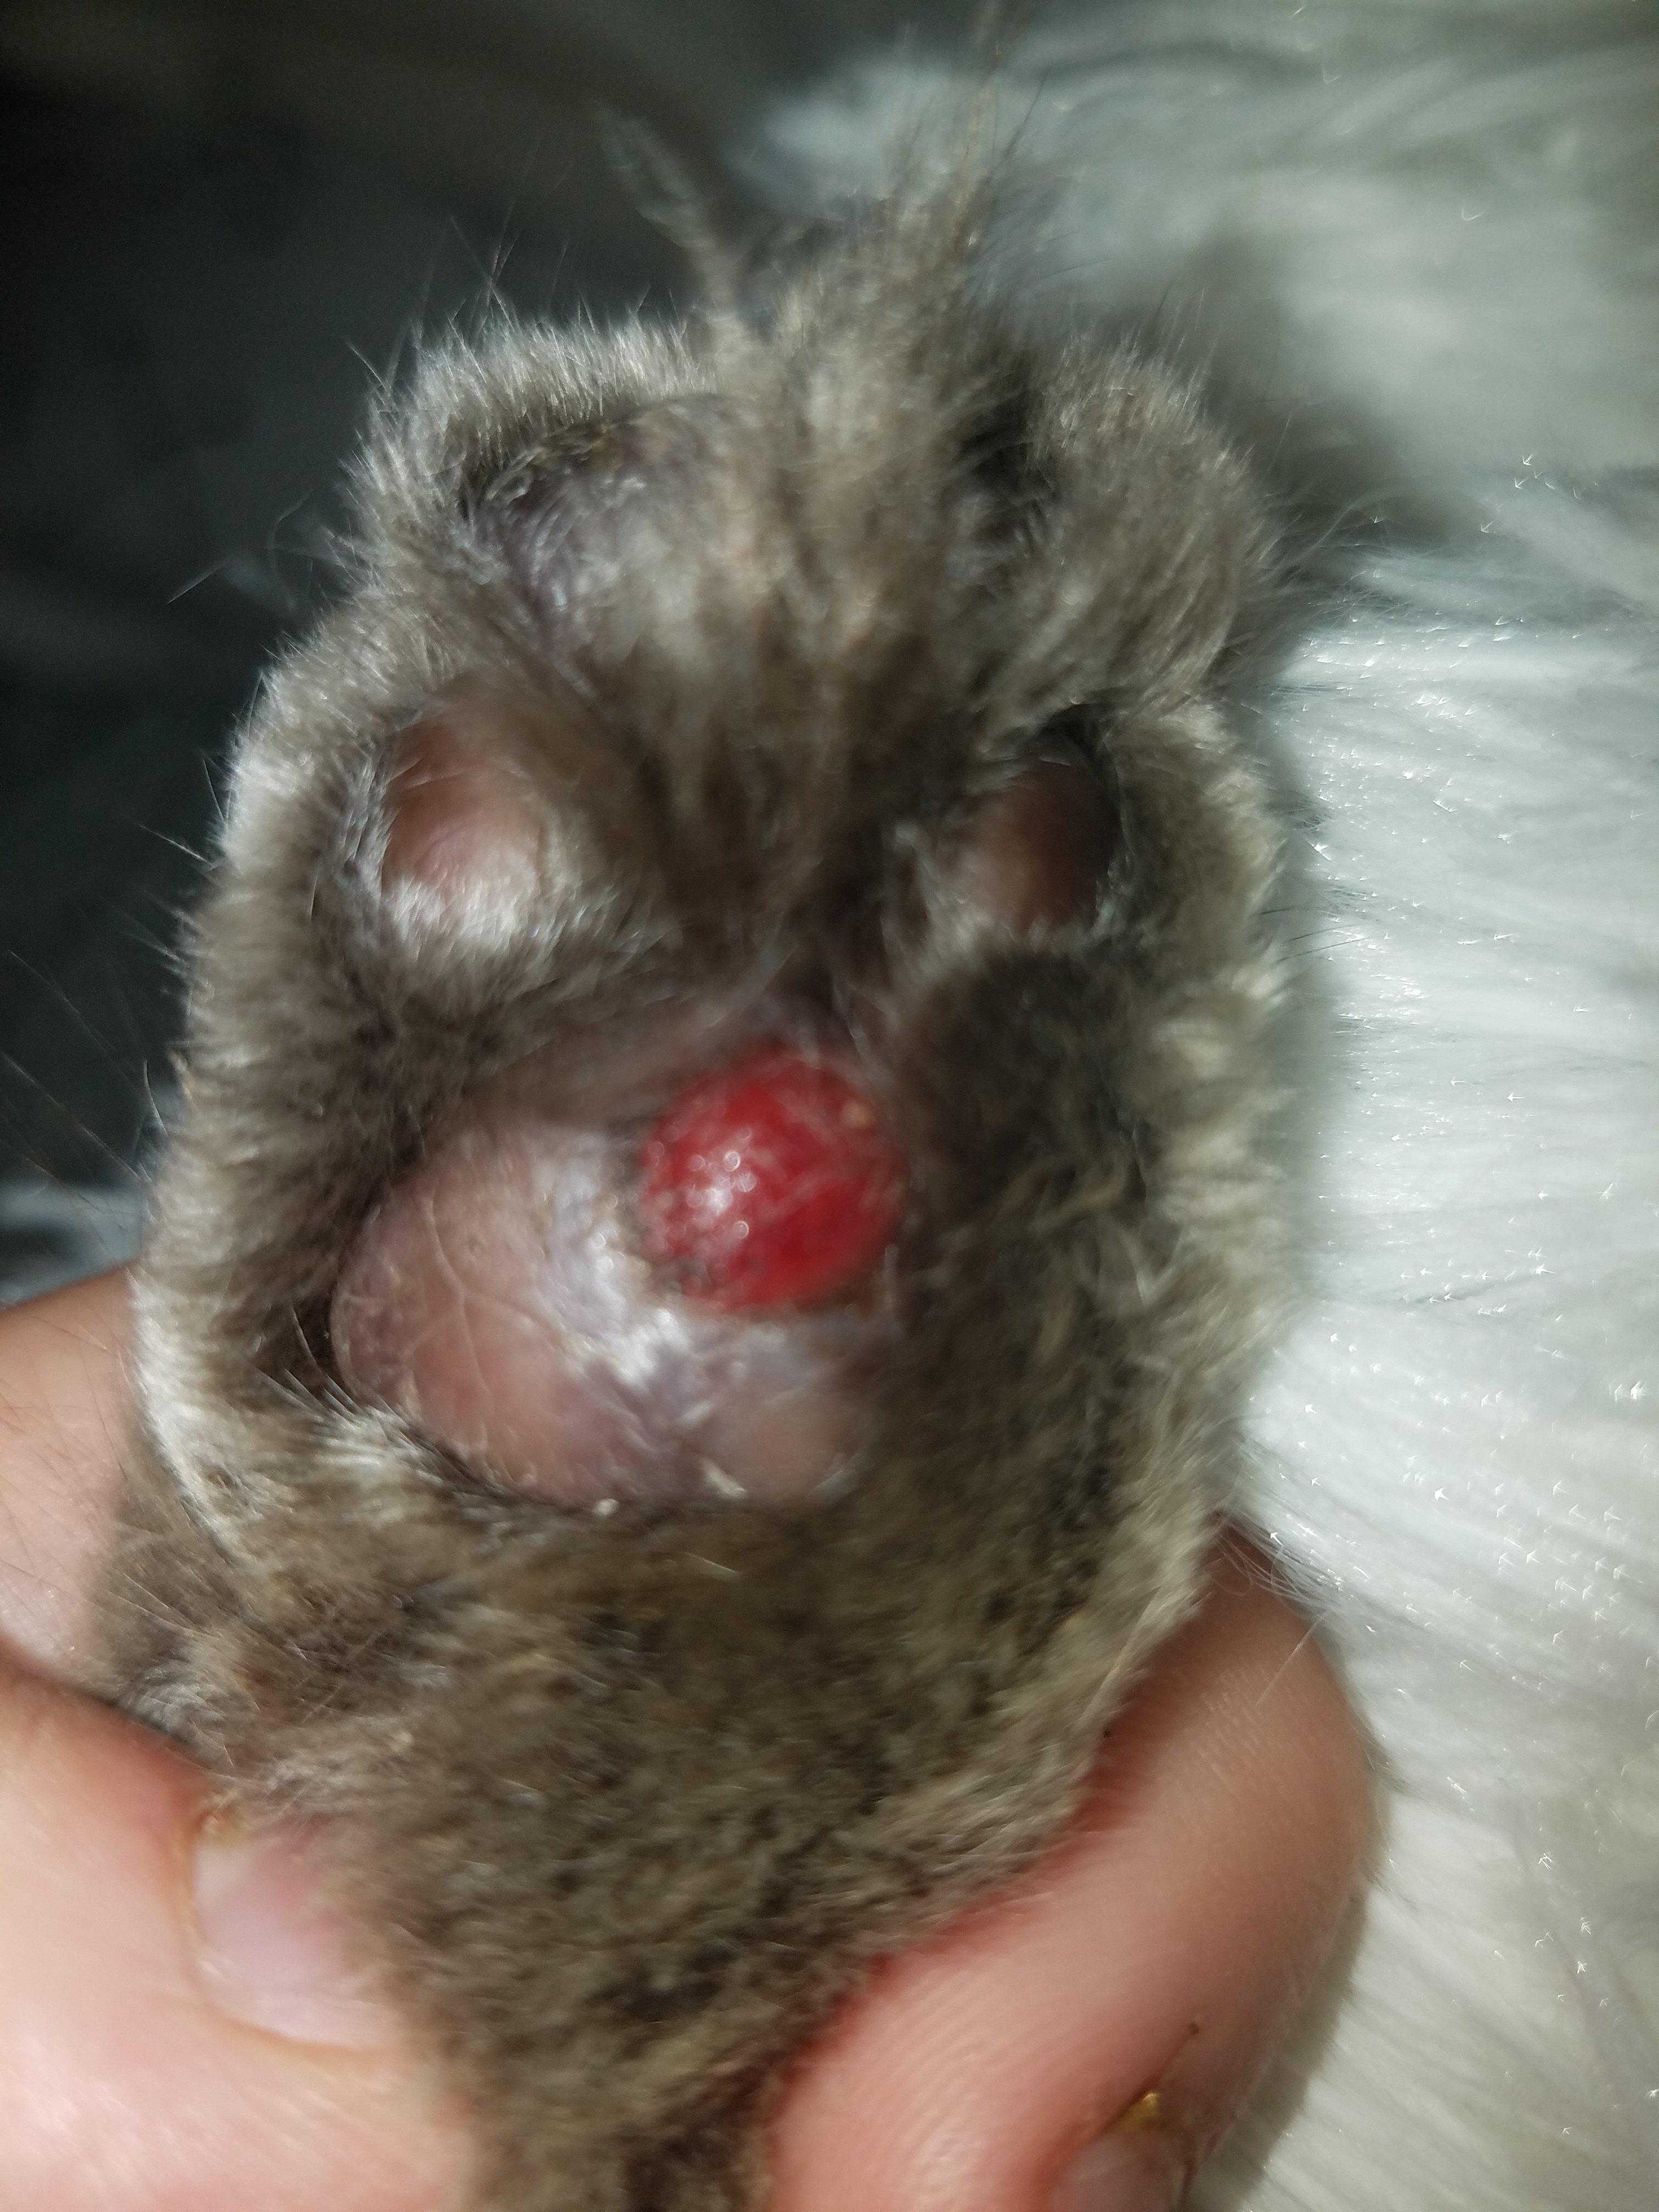 Blood Blisters? TheCatSite